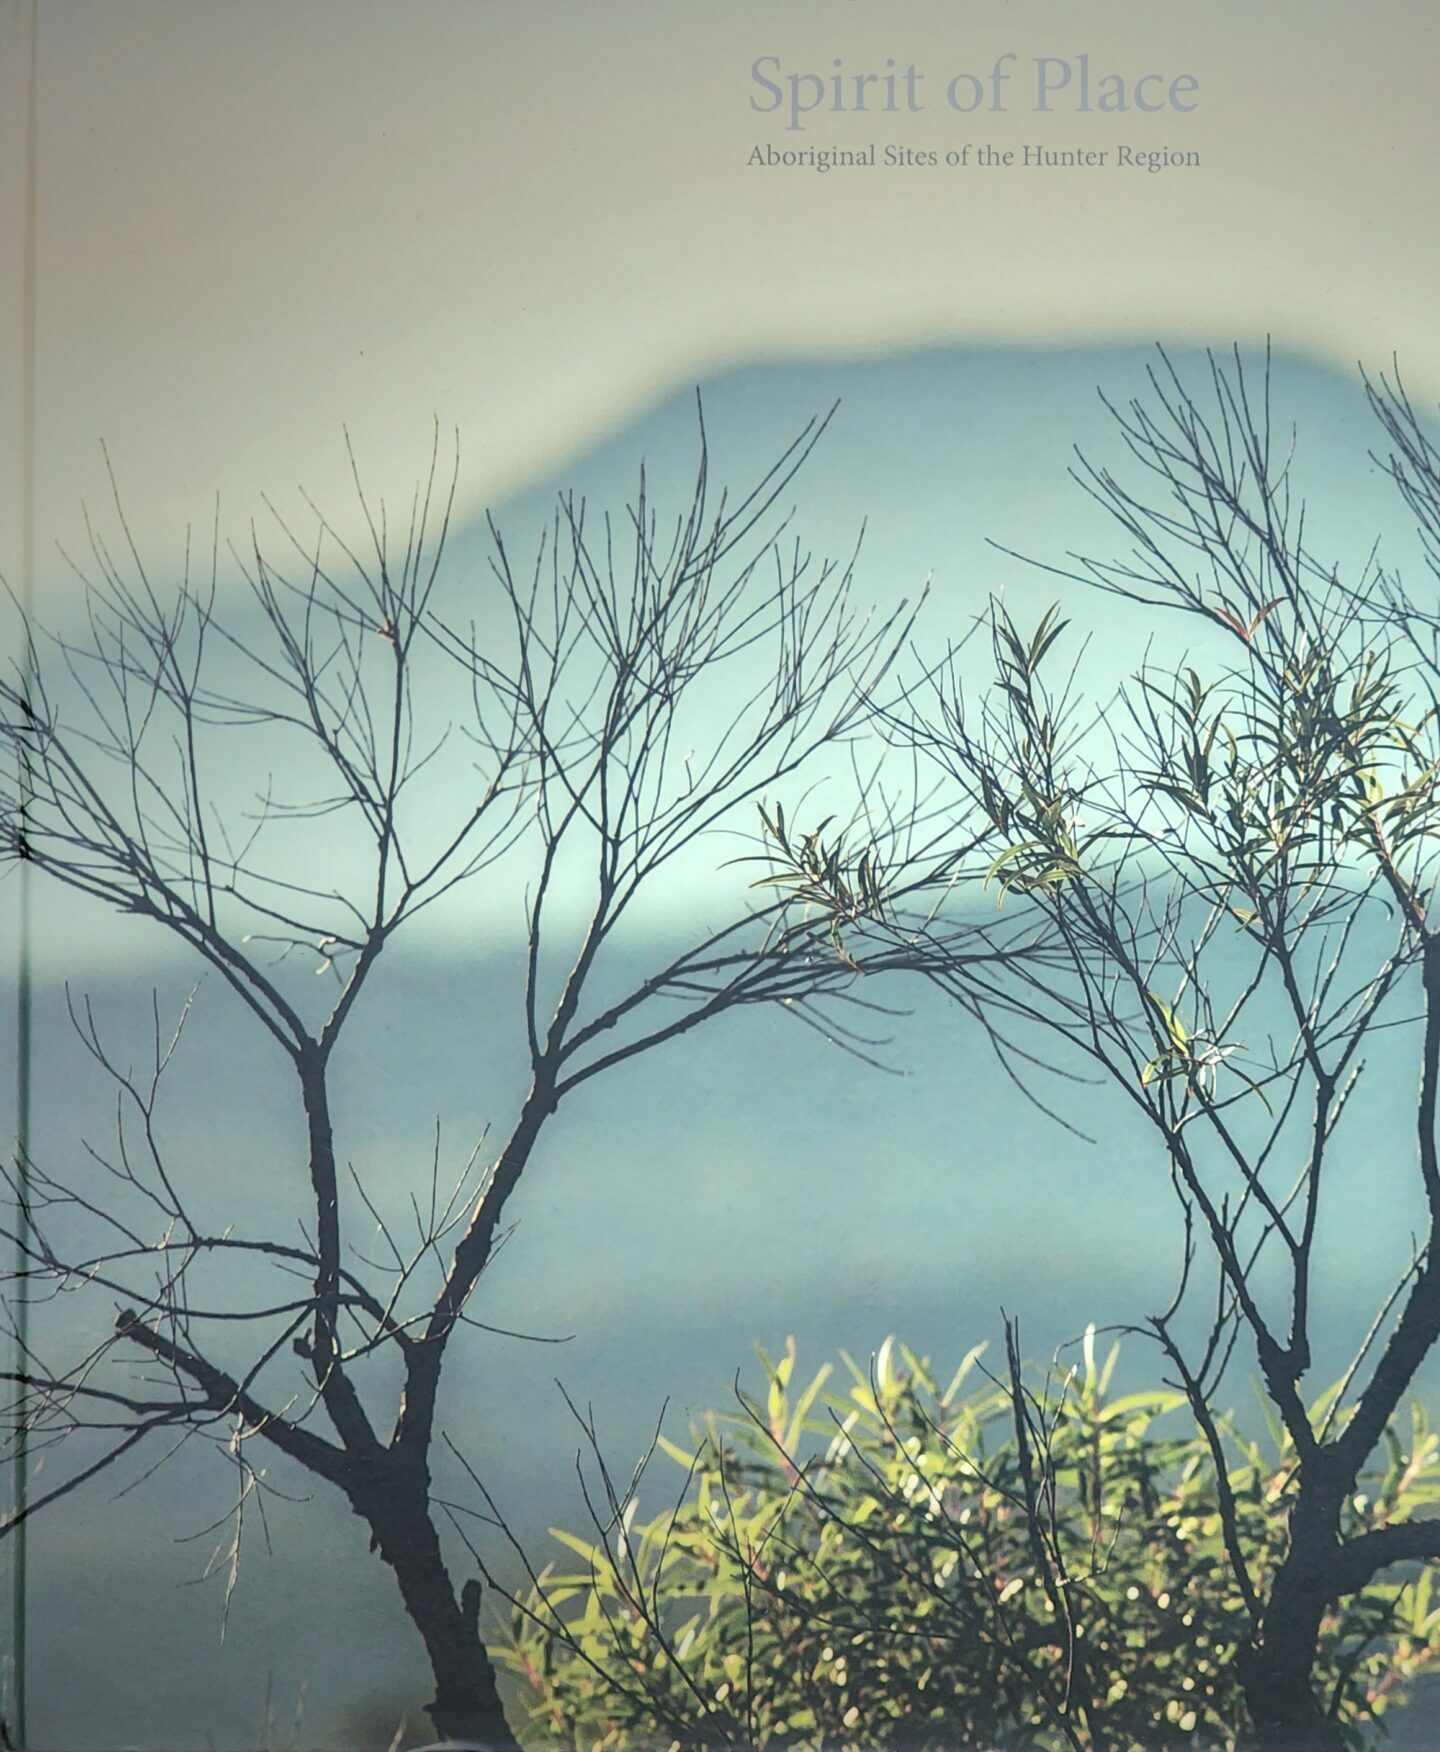 A book cover featuring tree branches in front of a mountain